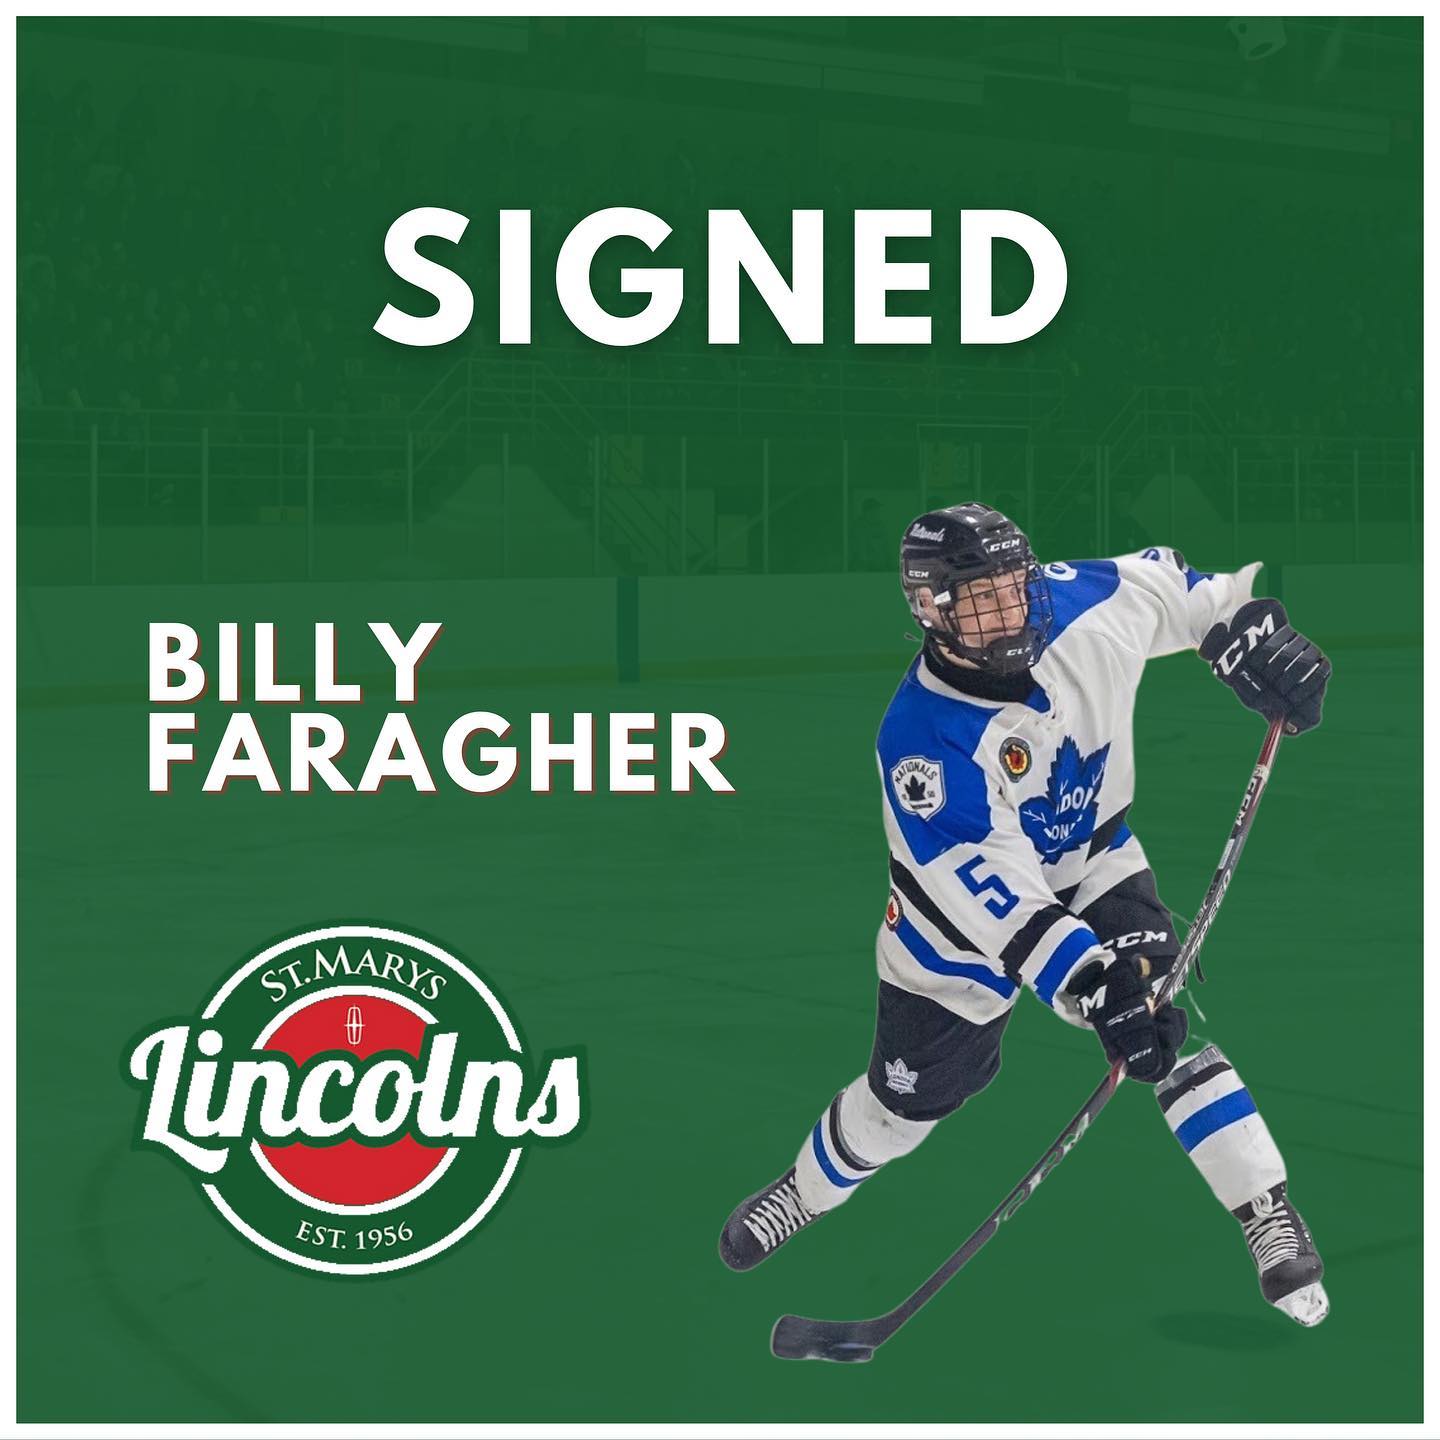 SIGNED - The Lincs have locked in Free Agent, Billy Faragher! The 19 year old blueliner previously suited up for the Nationals in the 2019-20 season. Welcome to the Stonetown! @billlyfaragher